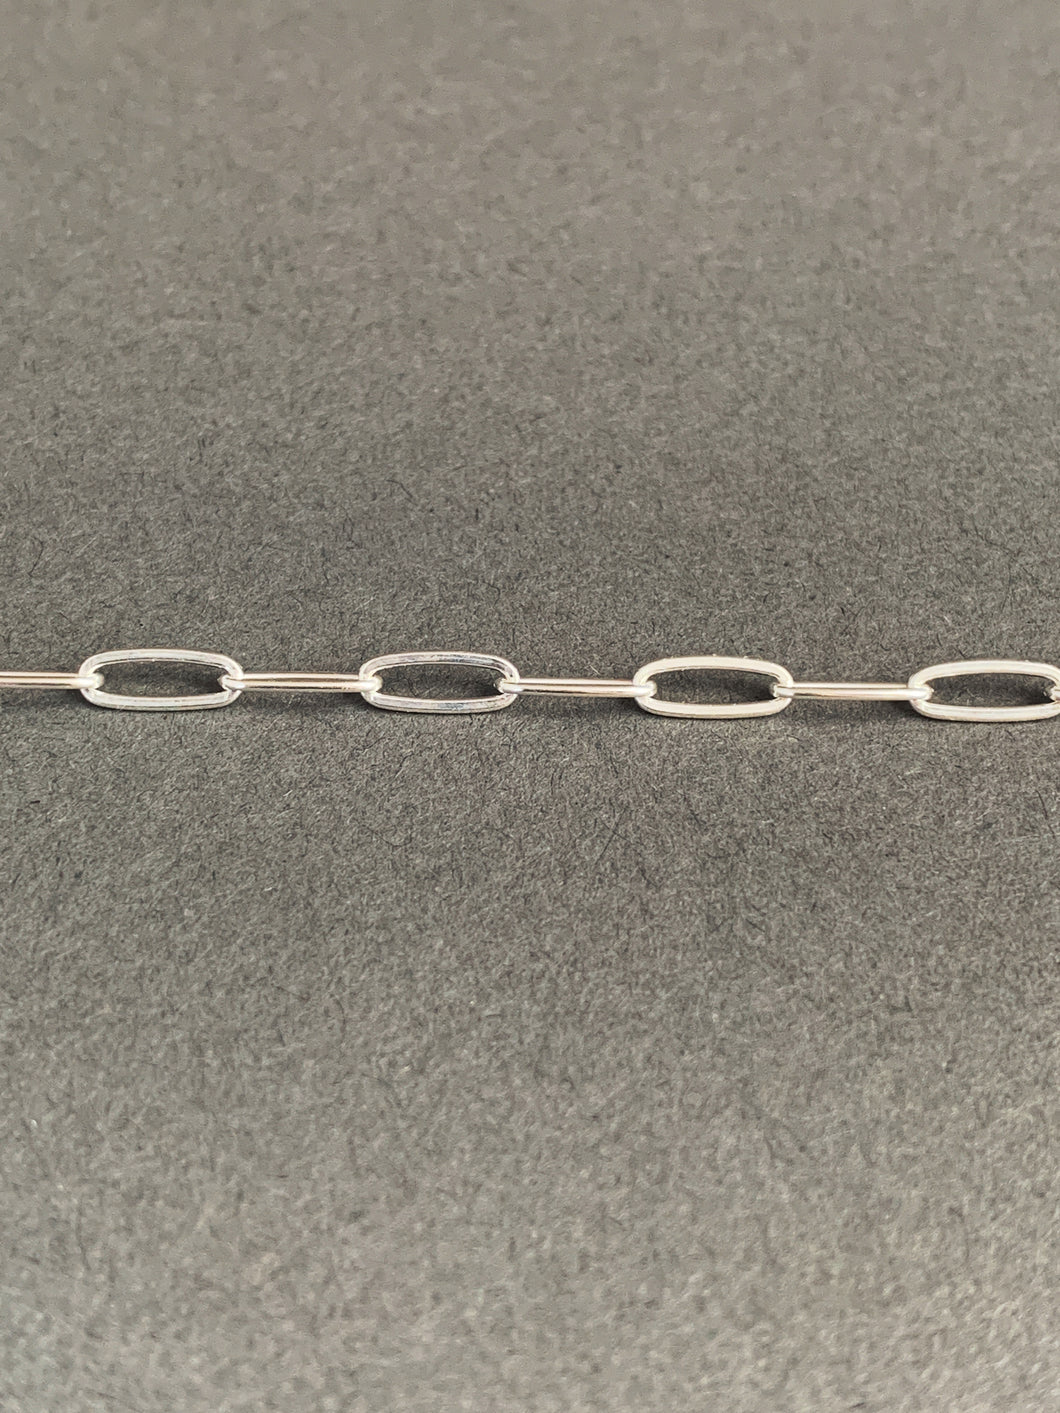 Add a chain to a necklace, medium 3.2mm elongated link shiny silver chain